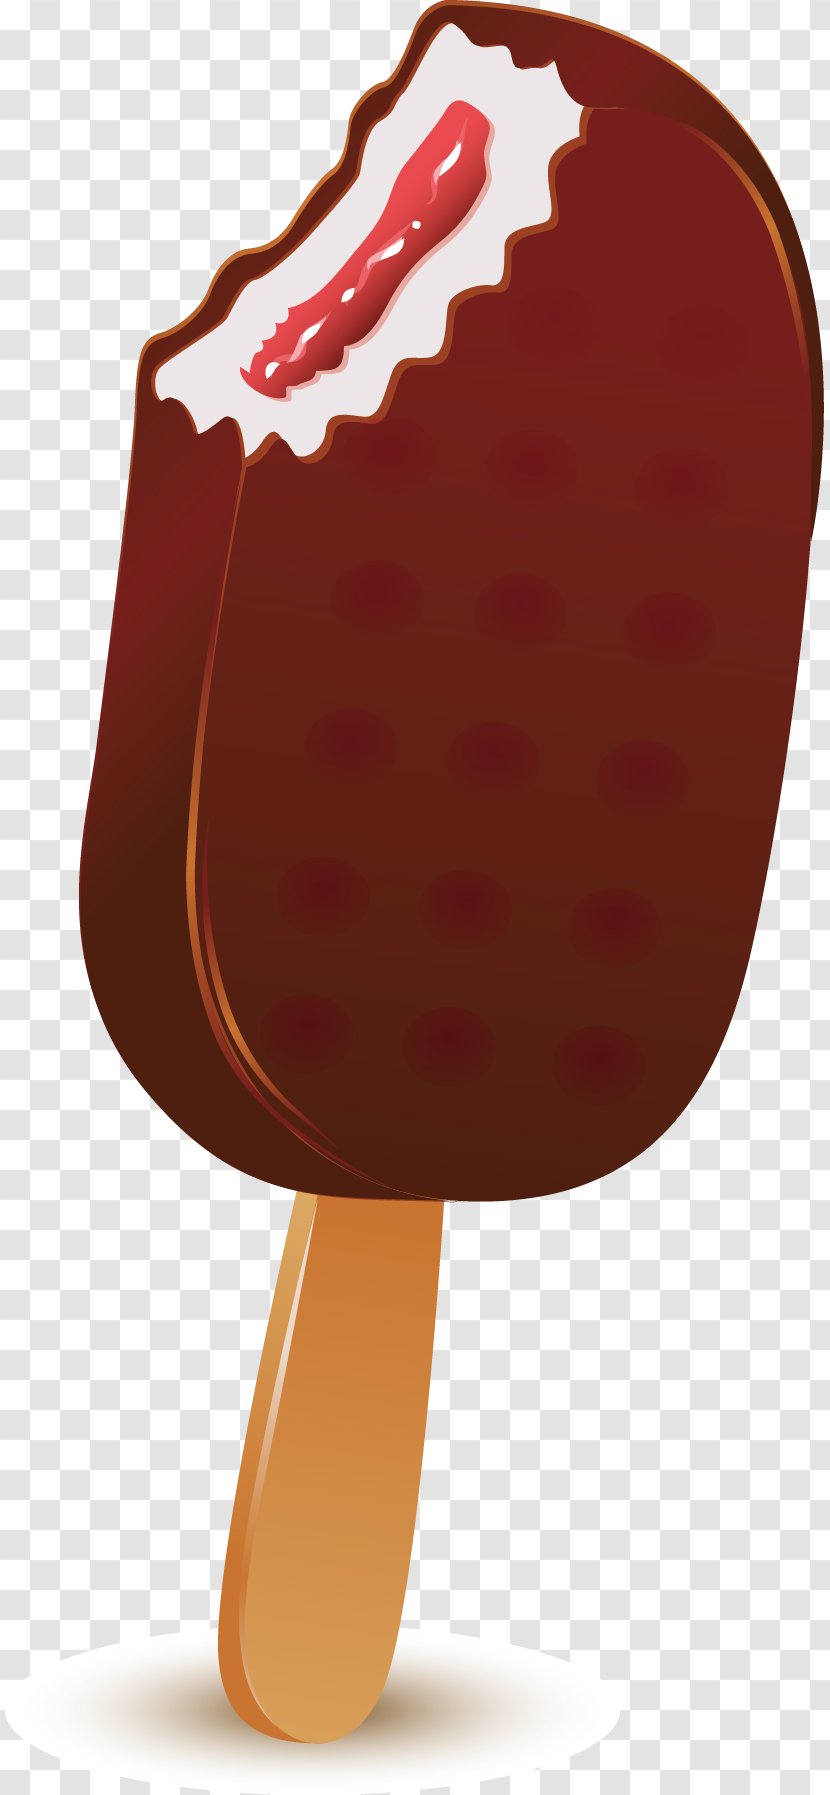 Ice Cream Pop - Hand-painted Decorative Material Transparent PNG